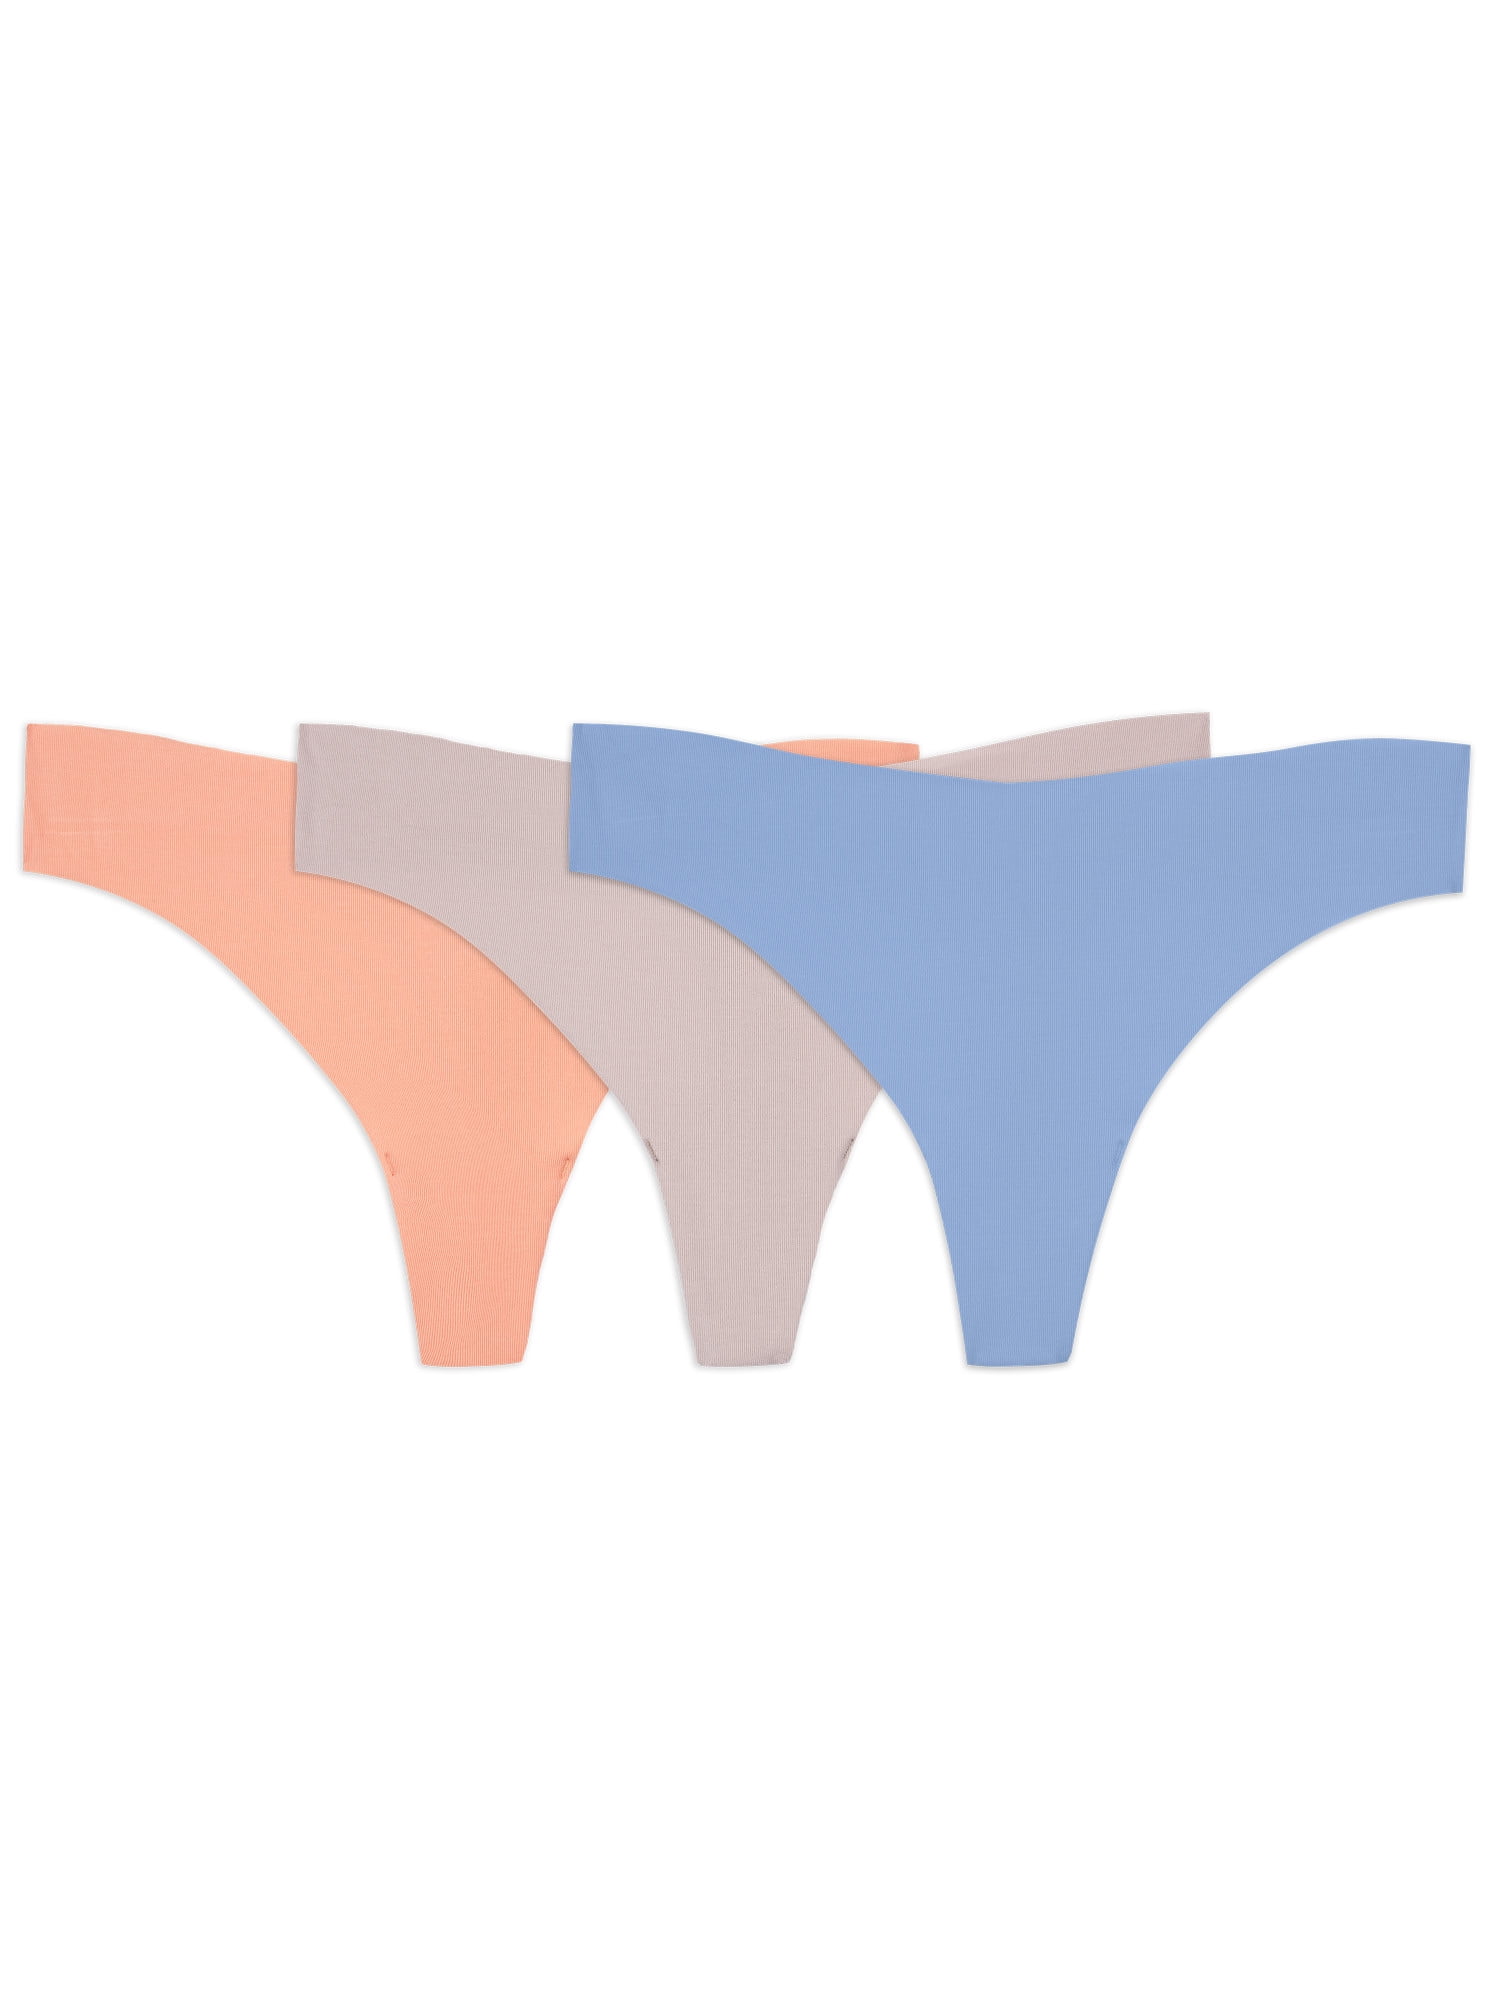 NOTYNUTS thongs panties/Thong Panty Free Size/sexy panty/pearl panty RANDOM  COLOR